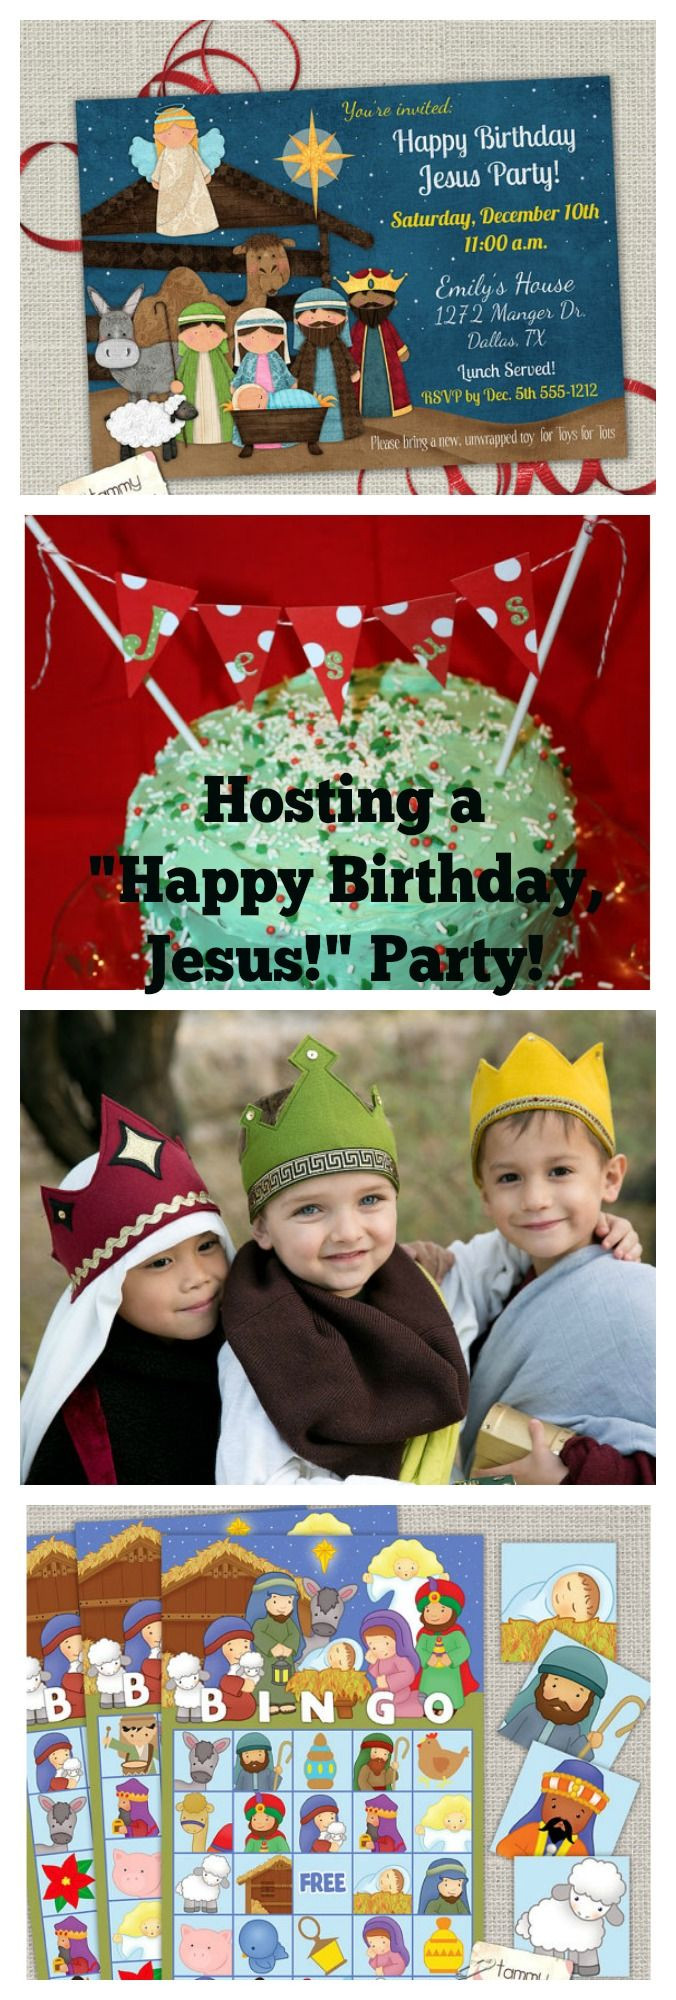 Sunday School Christmas Party Ideas
 How to host a Christmas Happy Birthday Jesus Party for